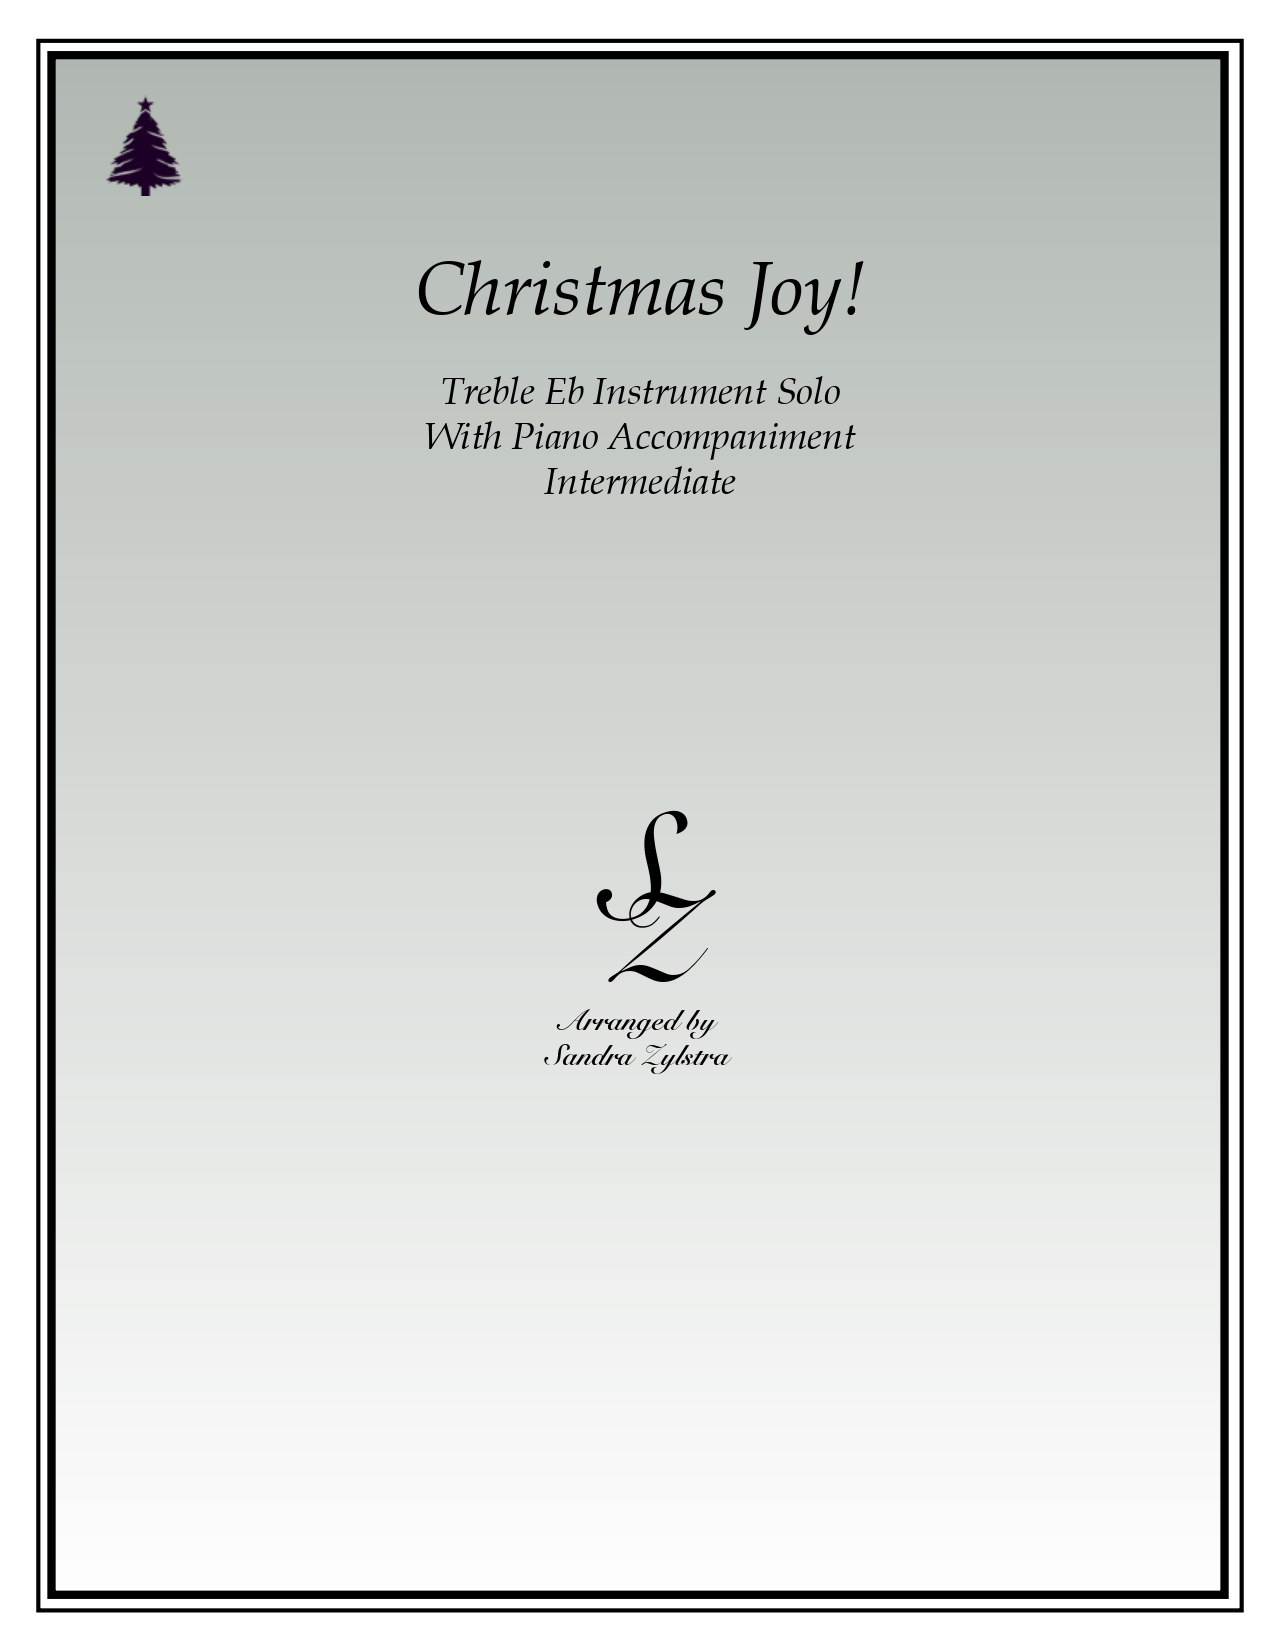 Christmas Joy Eb instrument solo part cover page 00011